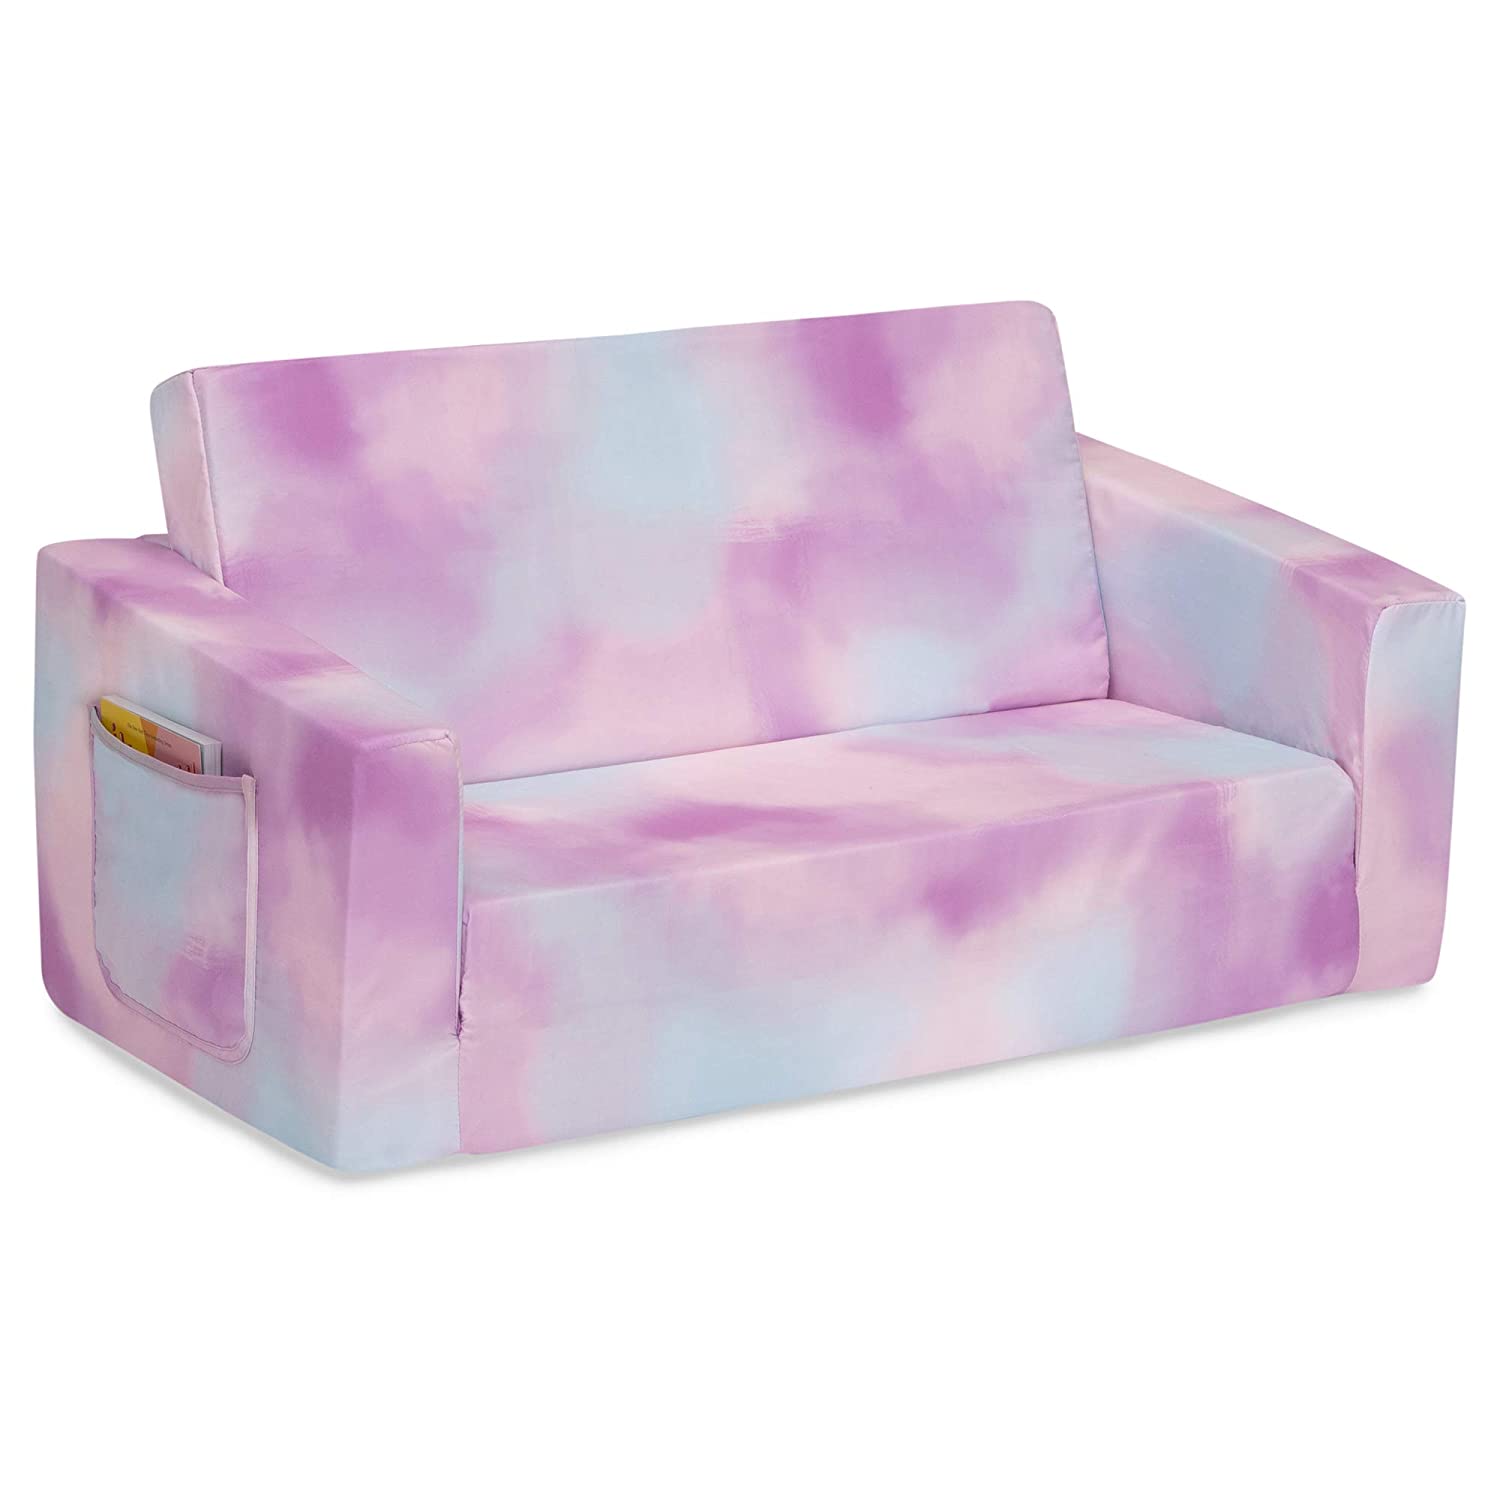 Delta Children Cozee Flip-Out Sofa - 2-in-1 Convertible Sofa to Lounger for Kids, Pink Tie Dye